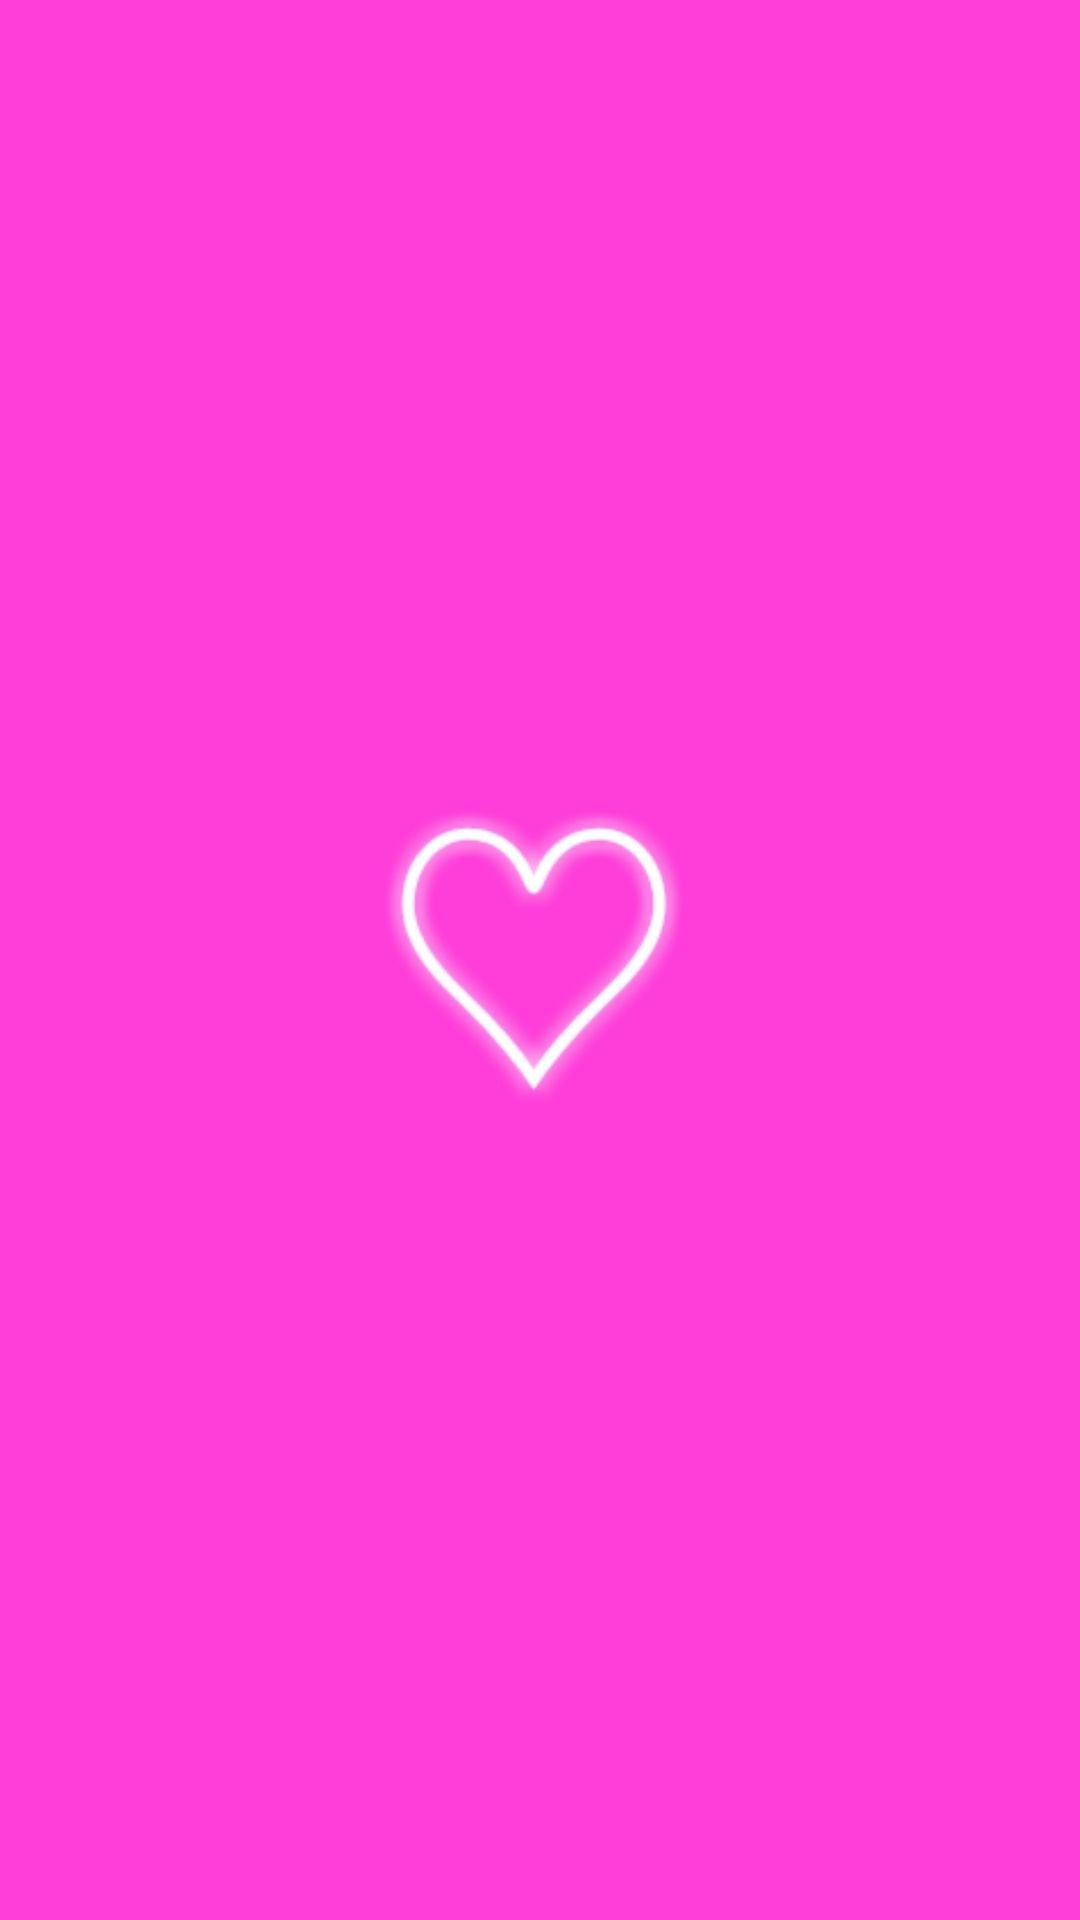 20 Best Hot Pink Aesthetic Wallpaper Iphone You Can Get It Free Of